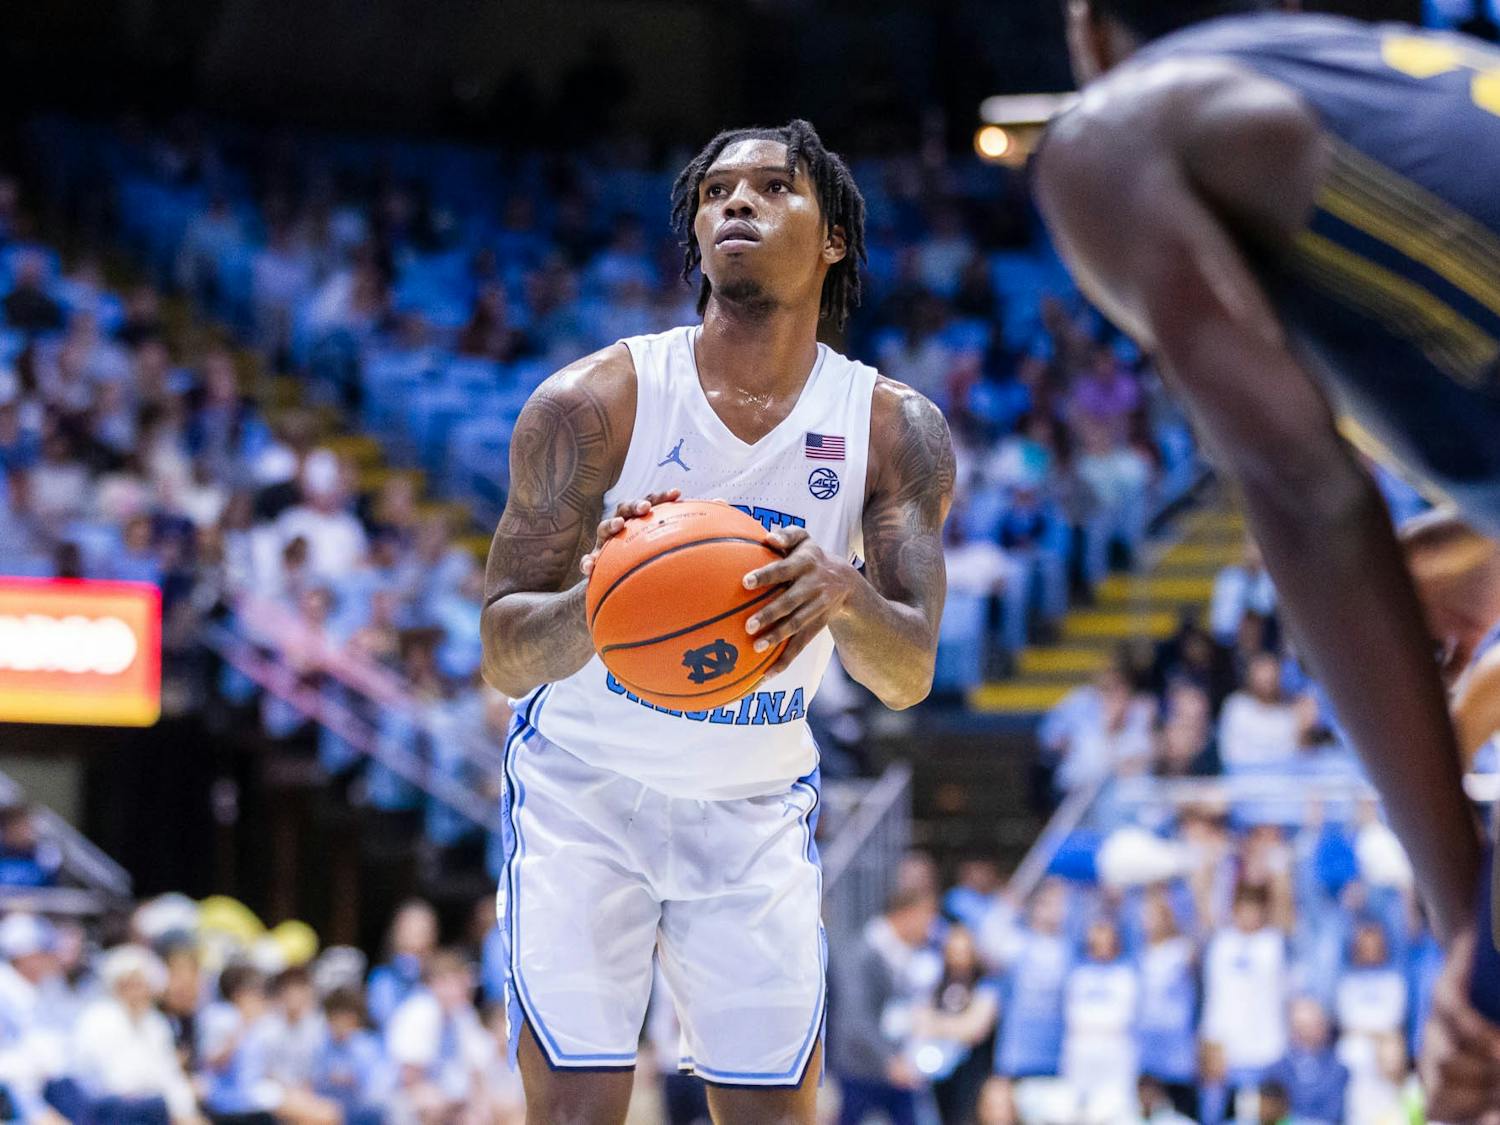 UNC junior guard Caleb Love (2) prepares to make a free throw during the exhibition game against JCSU at the Dean Smith Center on Friday, Oct. 28, 2022. UNC beat JCSU 101-40.